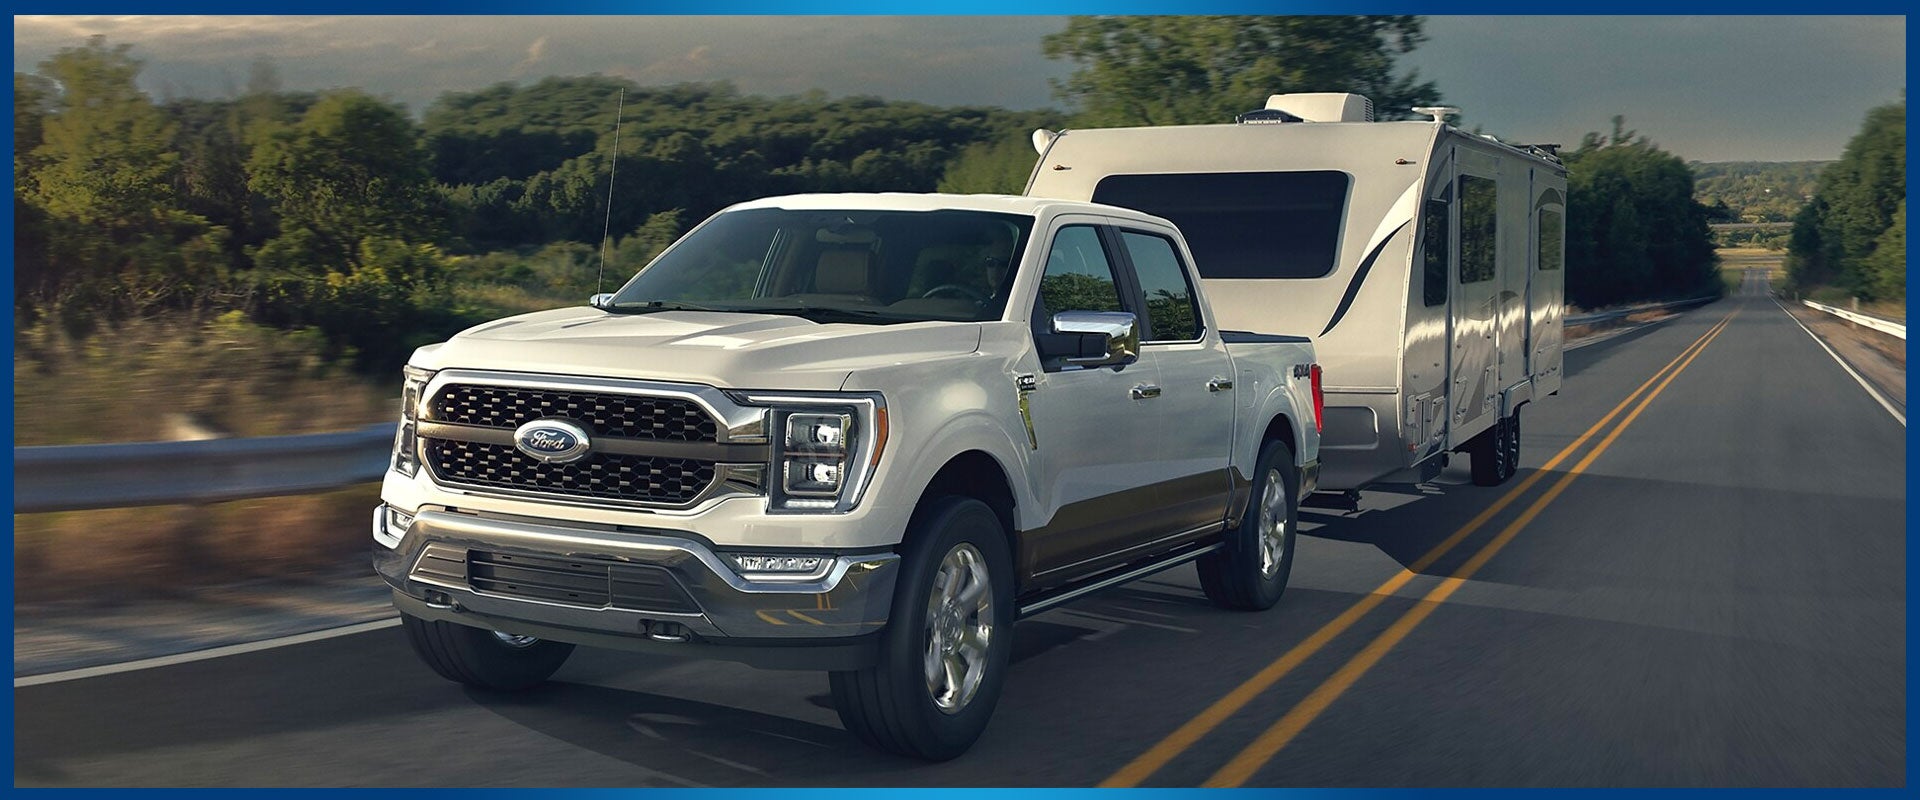 Ford Trucks Towing Capacity